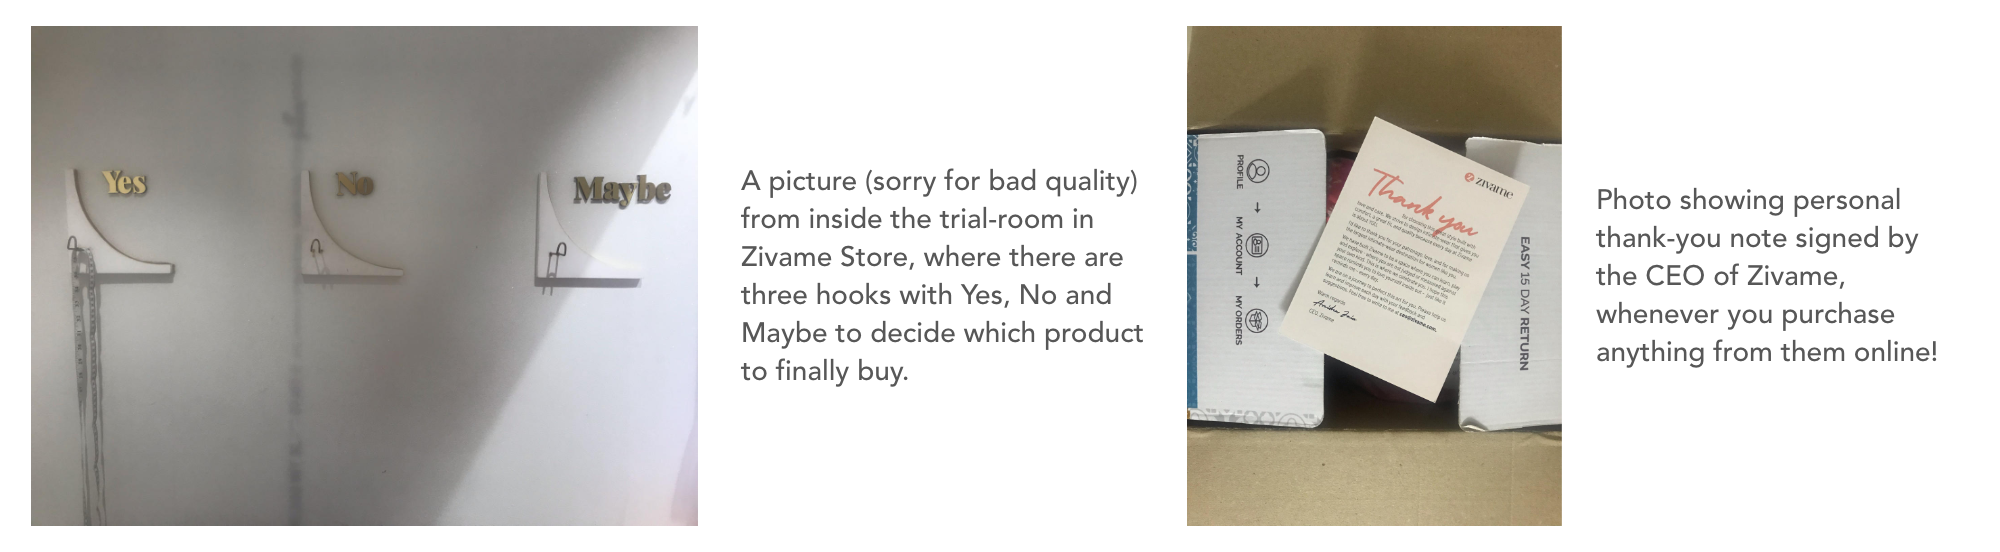 On left, a picture of Zivame trial room, On right, a picture of thank-you note with Zivame online shopping, Source: uxdesign.cc